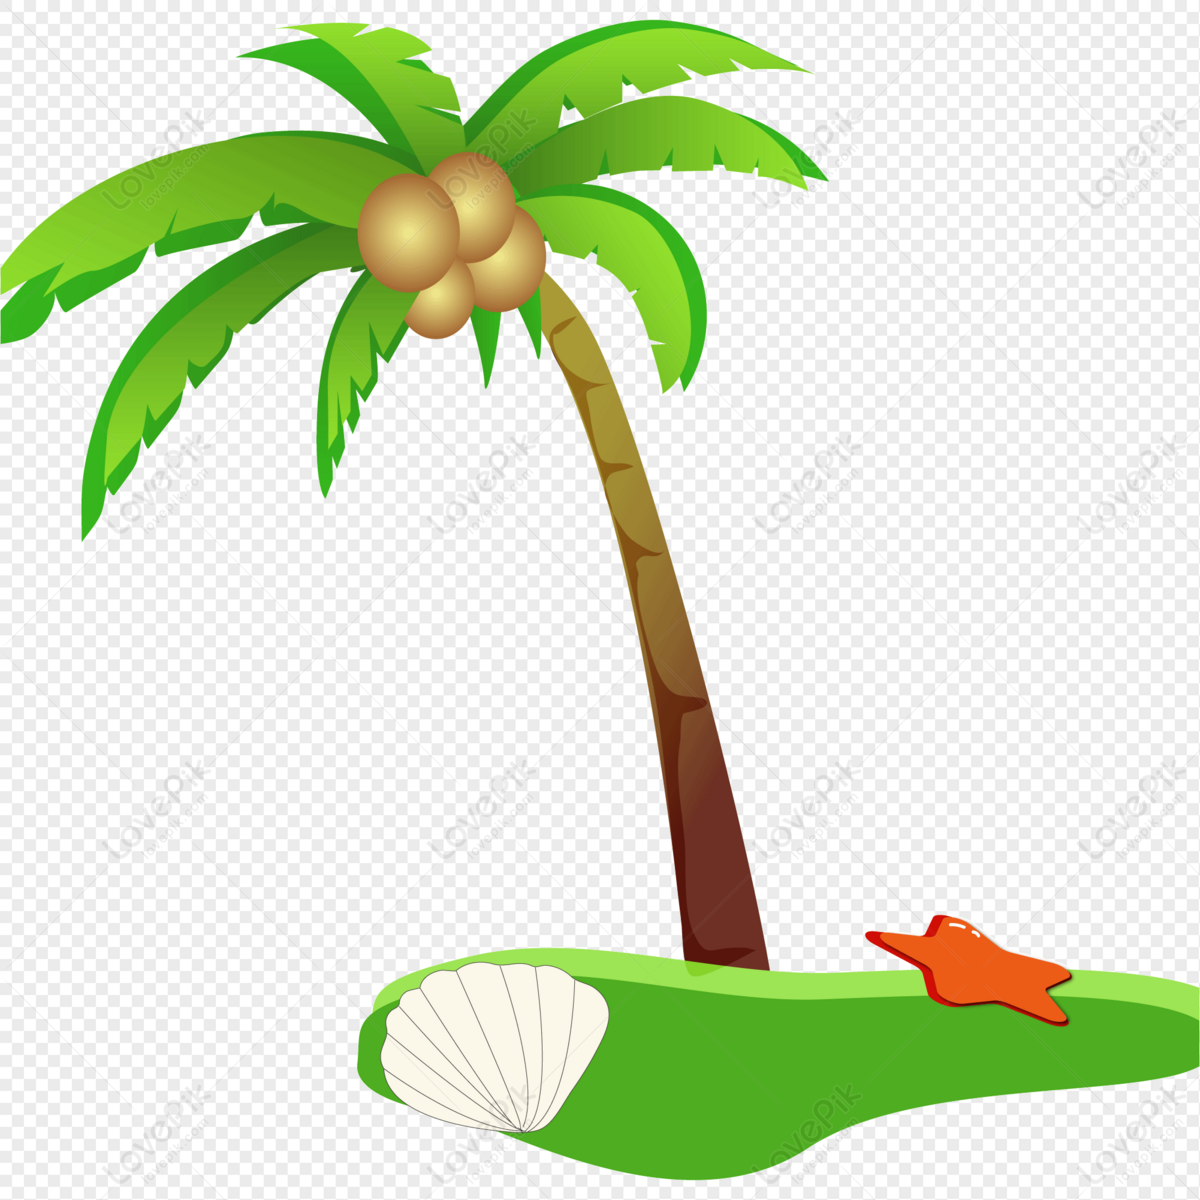 Summer Seaside Coconut Tree PNG Transparent Image And Clipart Image For ...